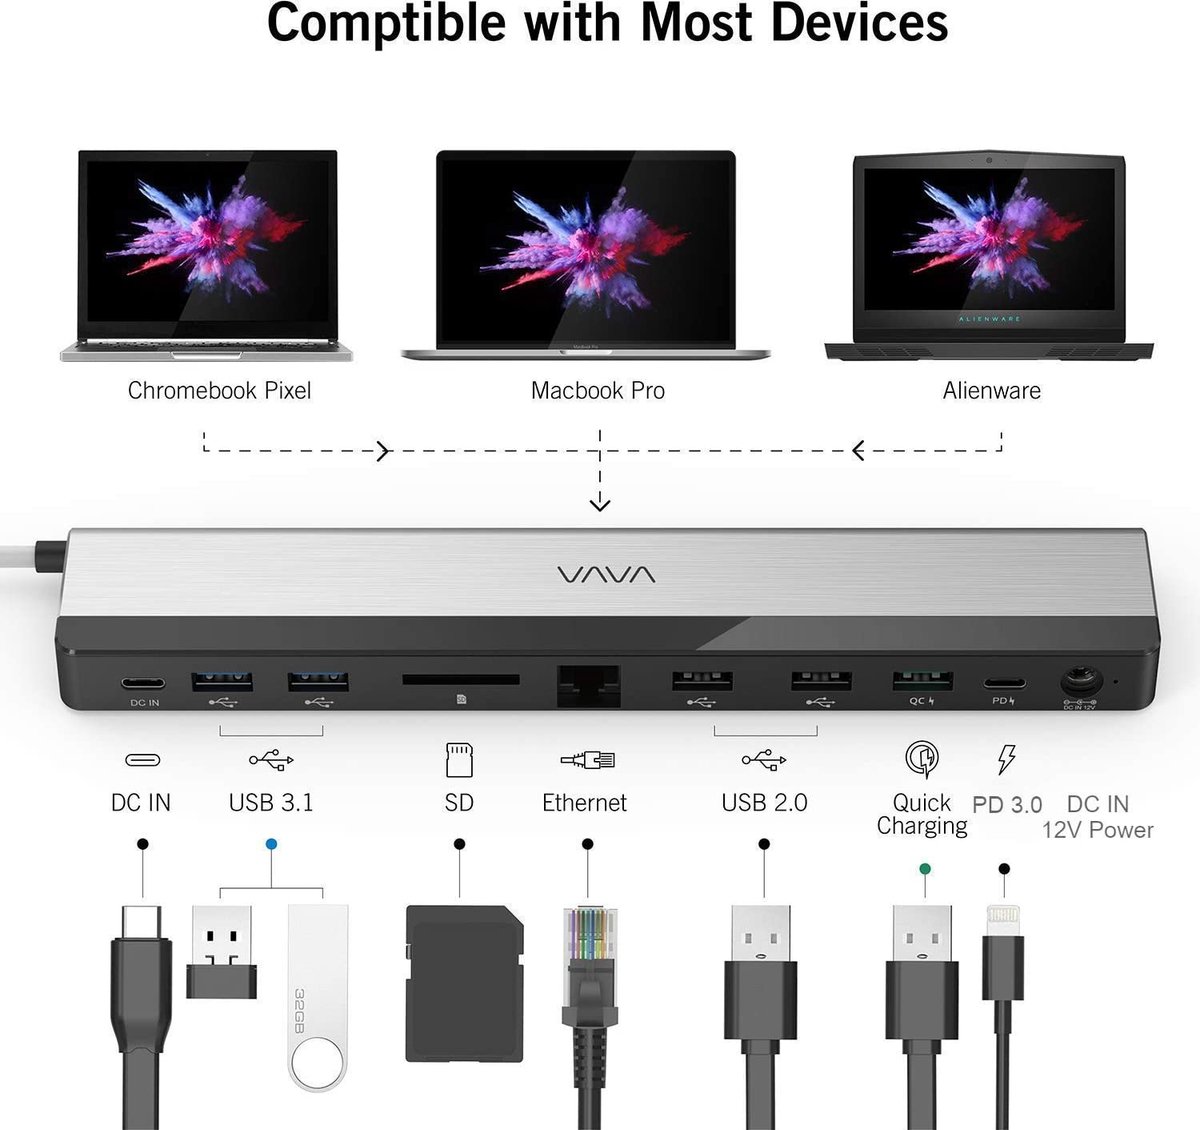 VAVA USB C Hub Docking Station EU with 36W Adapter, 100W PD, Ethernet Port, SD Card Slot, 2 x USB 3.1, 2 x USB 2.0, QC 3.0 Ports, PD 3.0 Port, DC in Port for MacBook Pro and Type C Windows Laptop